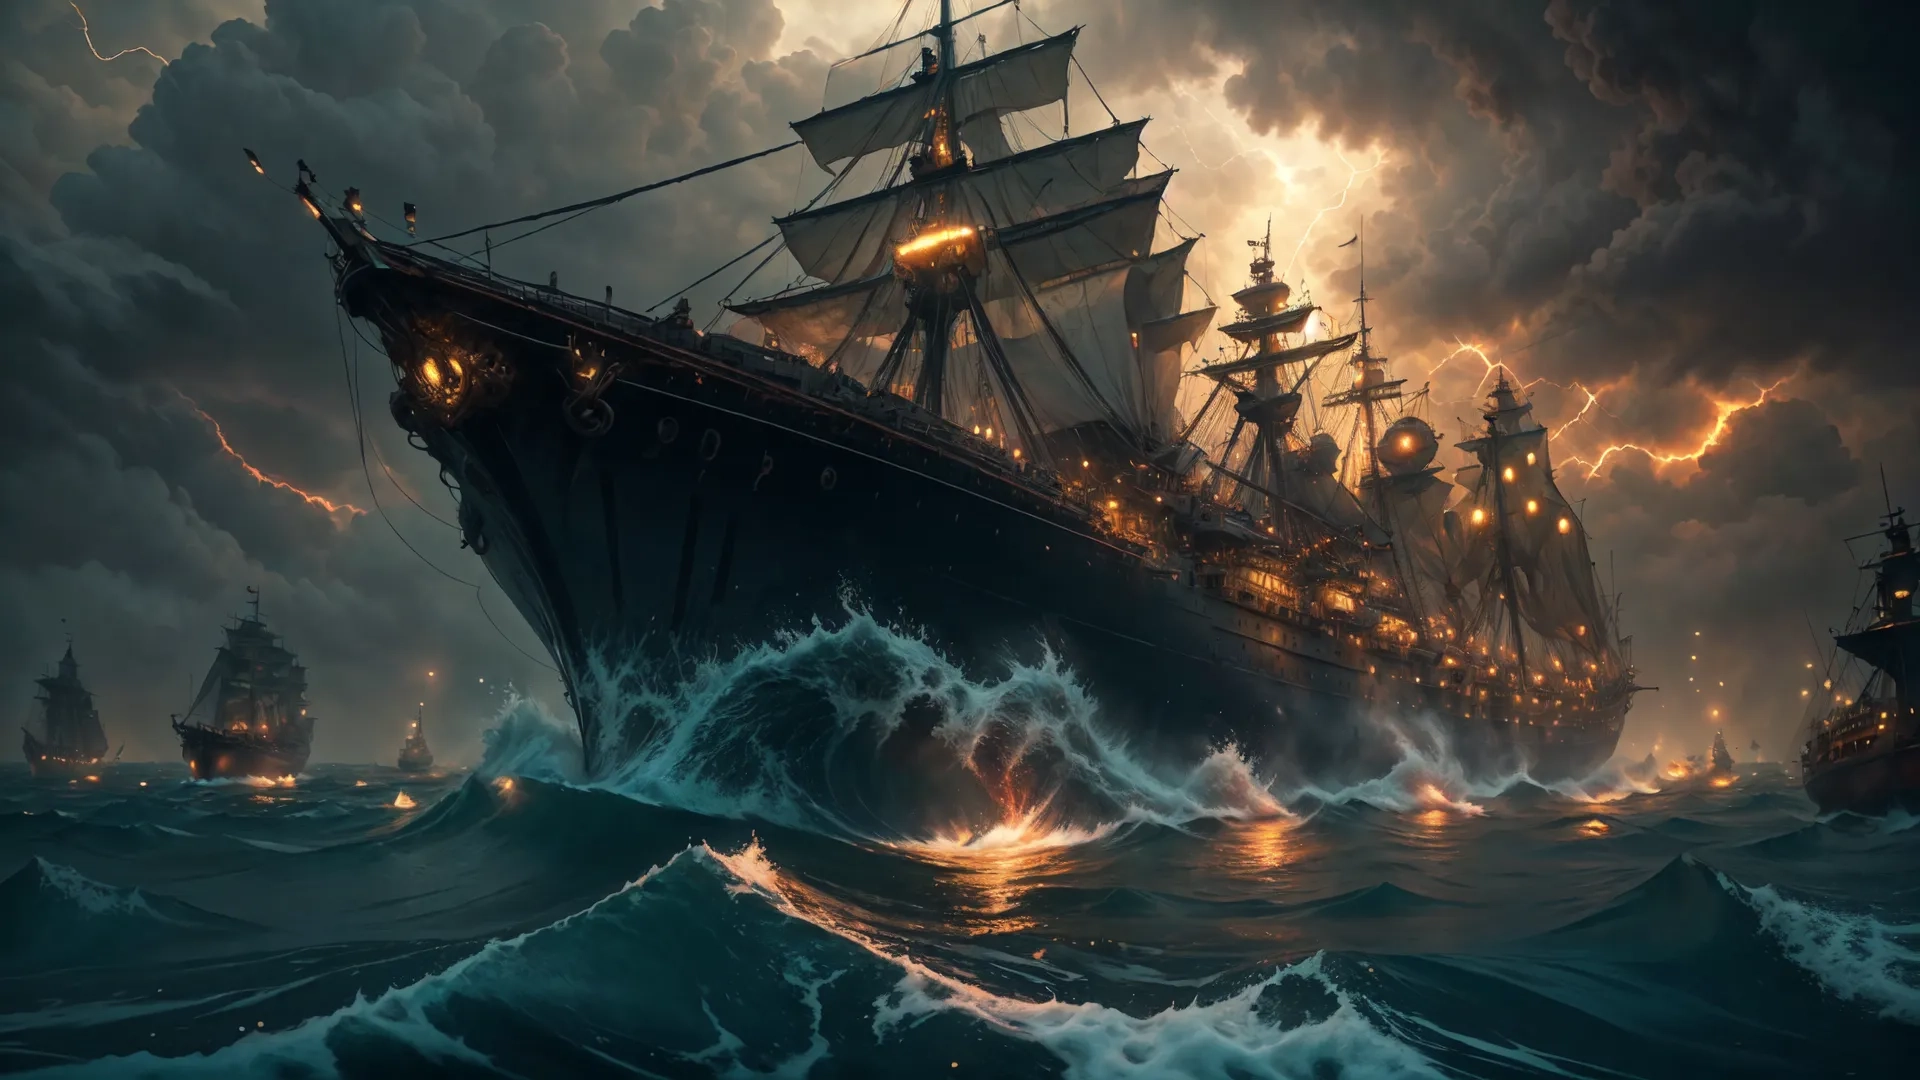 an image of ships in the ocean and stormy sky with water coming towards them, but only one has lights on and some people are also visible
